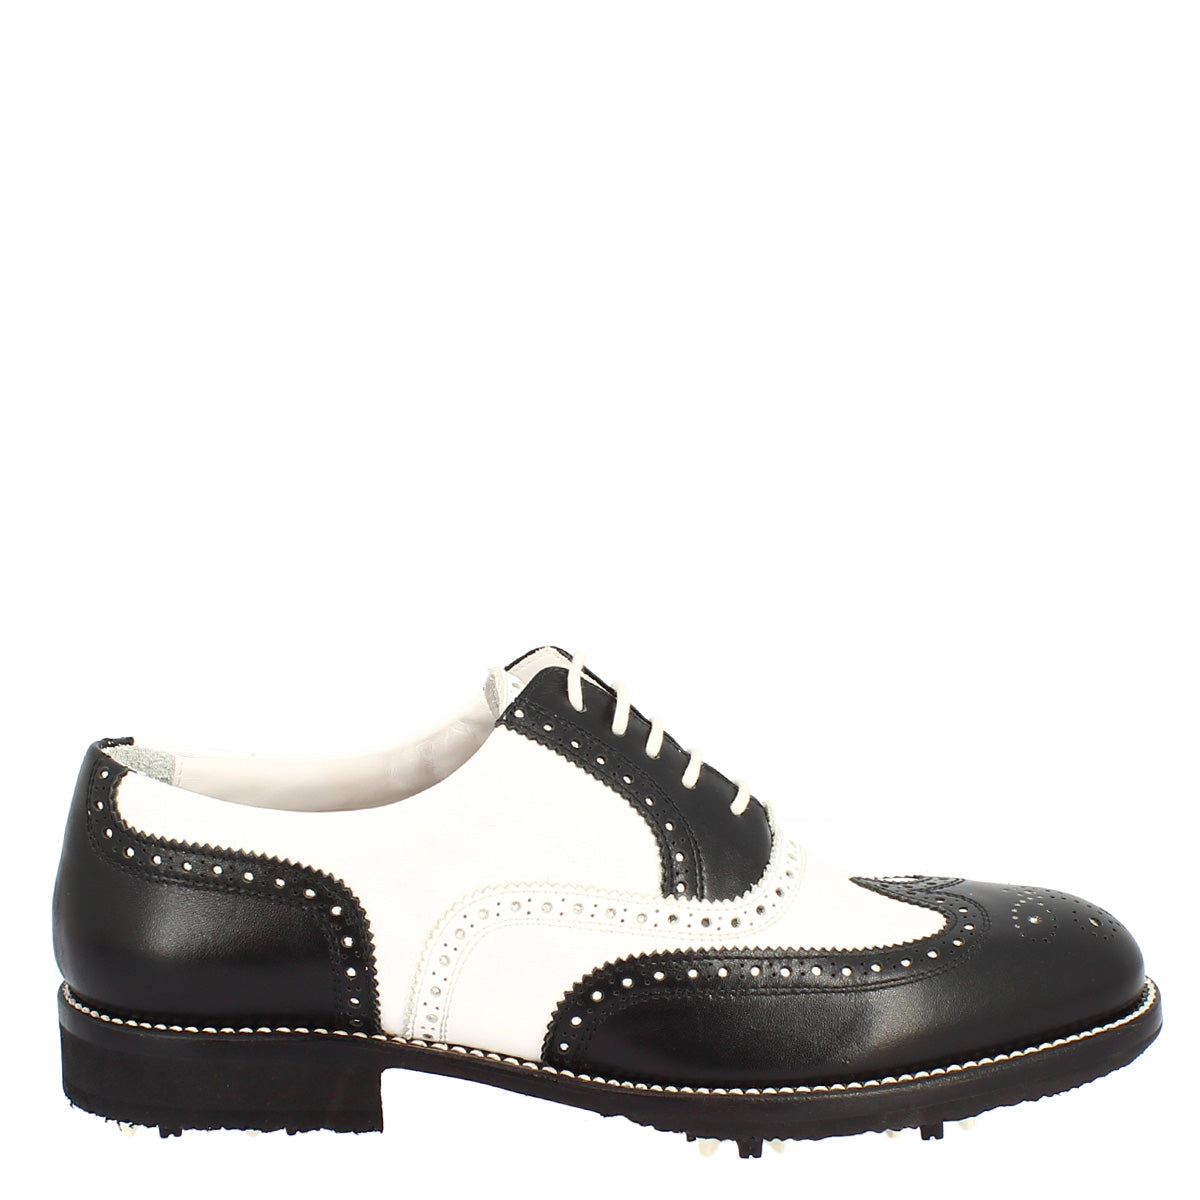 Handmade two-tone black and white women's golf shoes in leather